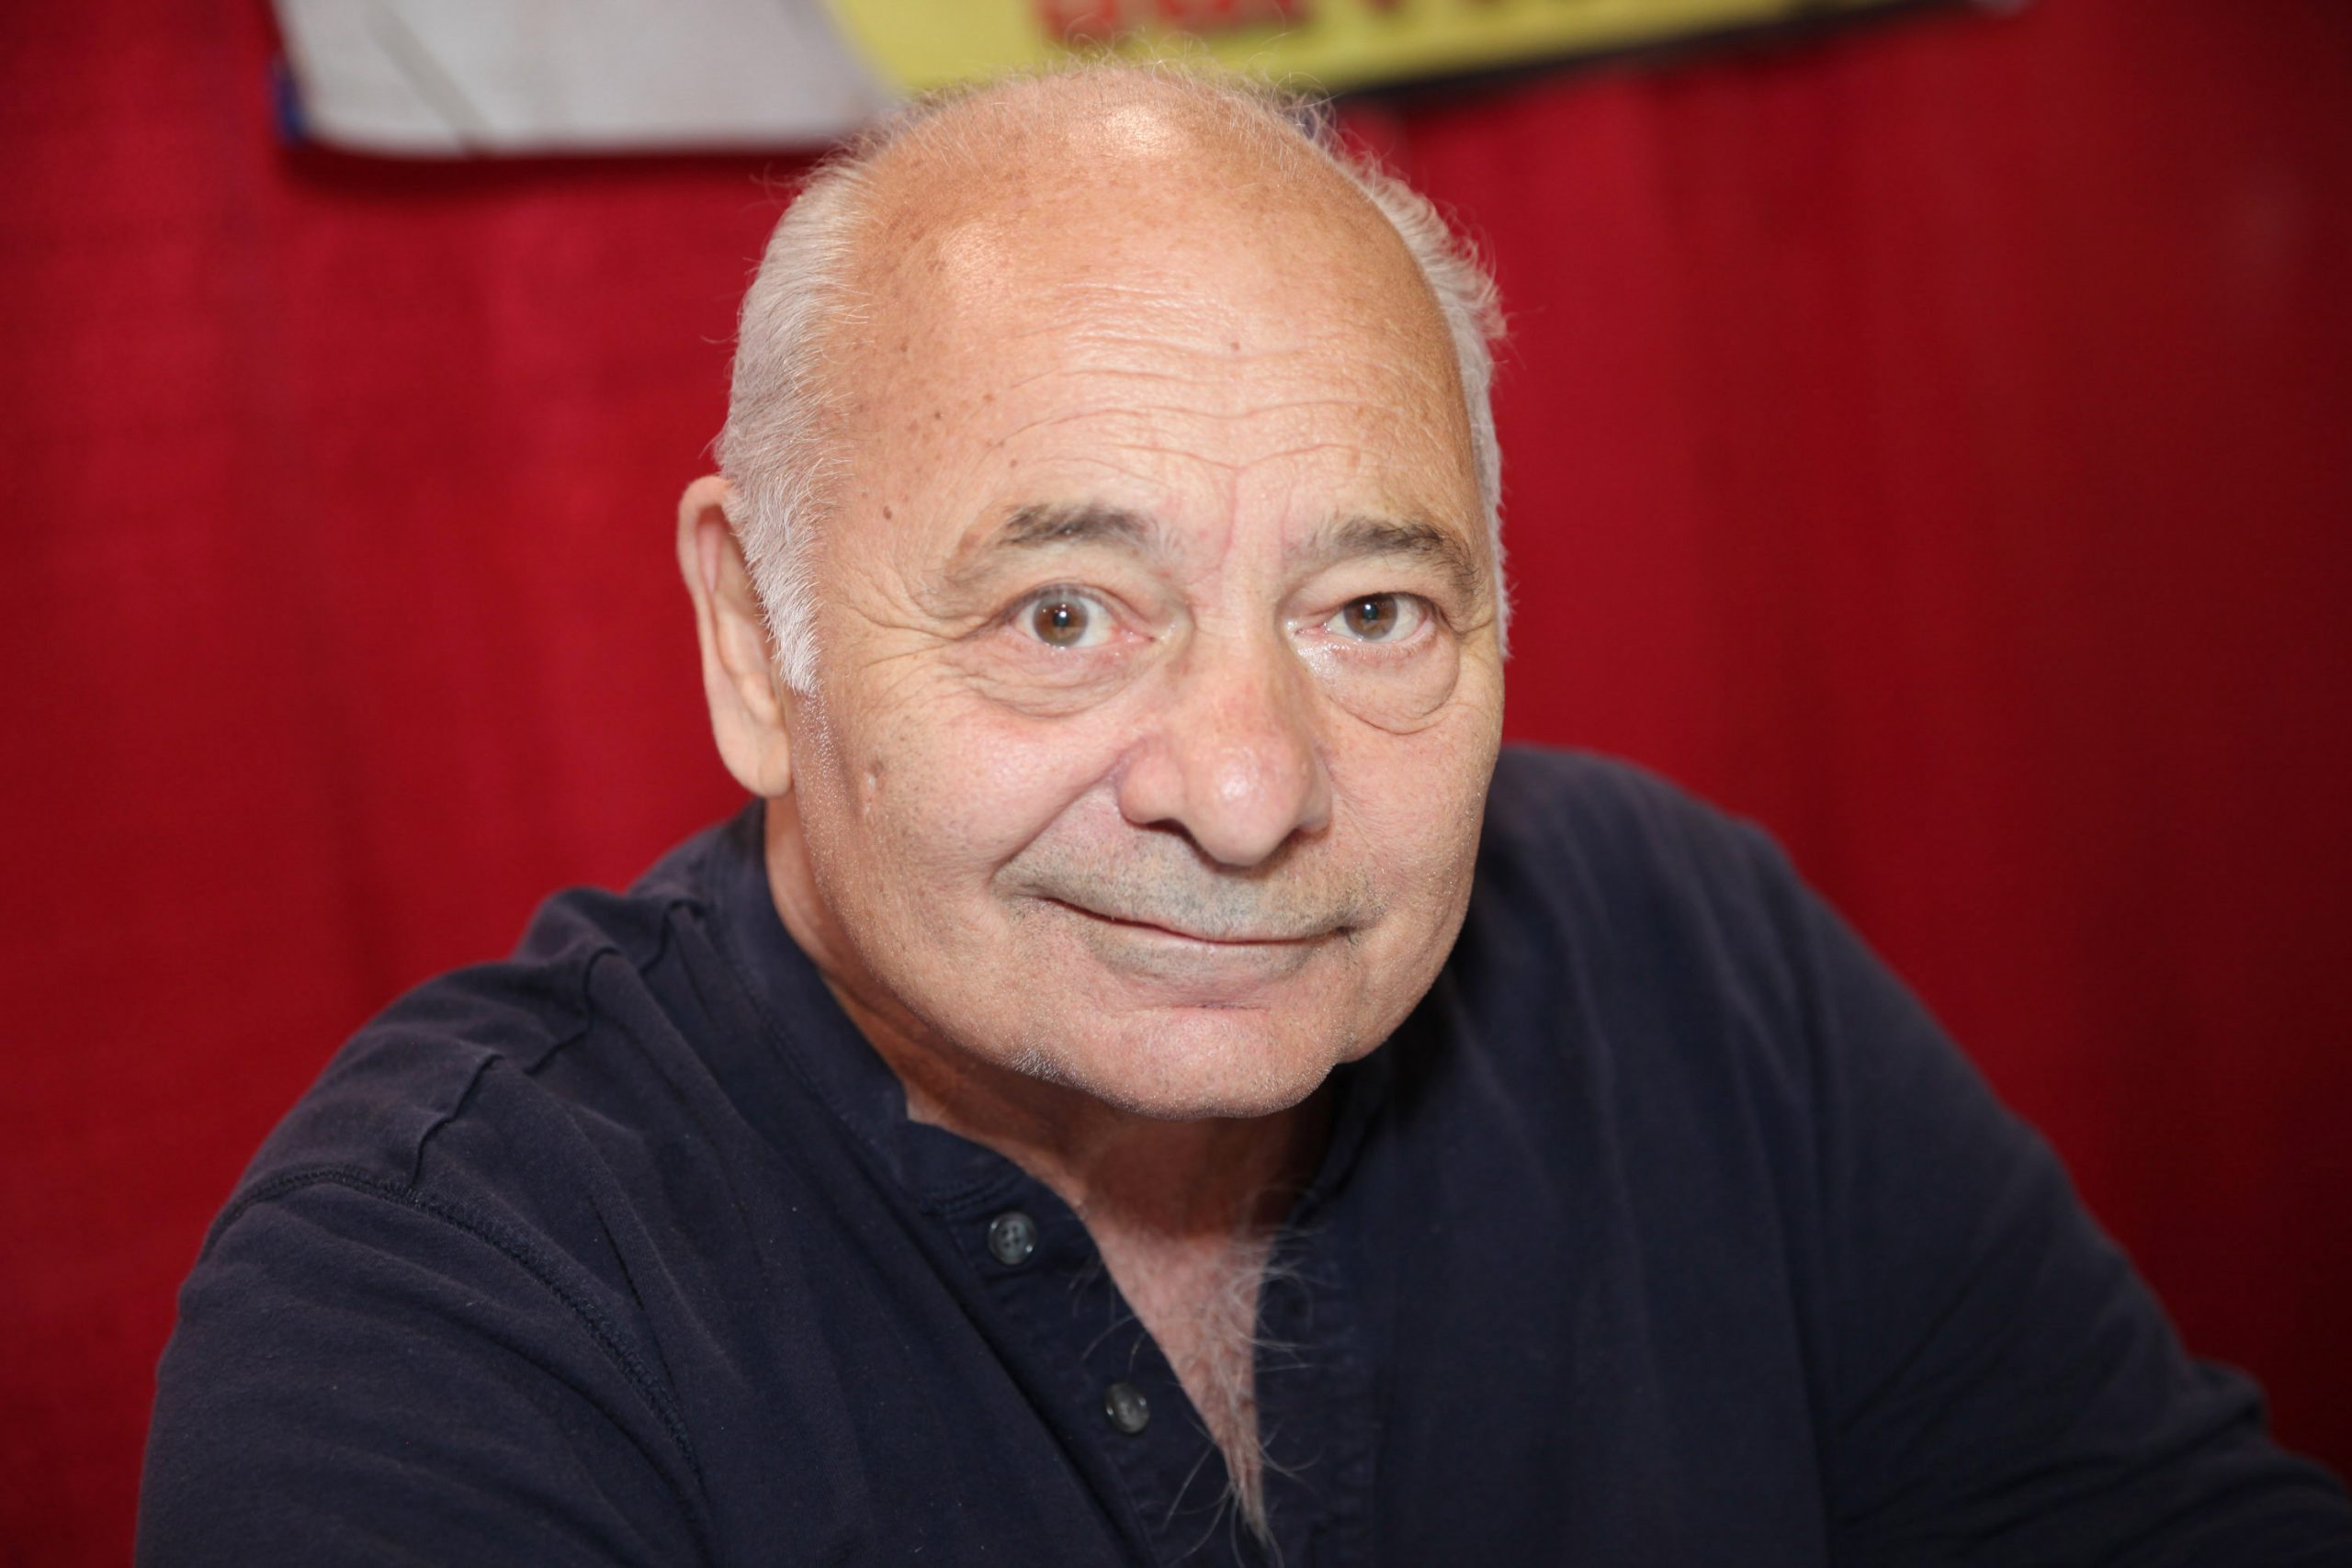 Burt Young dead at 83: Rocky actor and Academy Award nominee passed in LA after decades-long film and boxing career